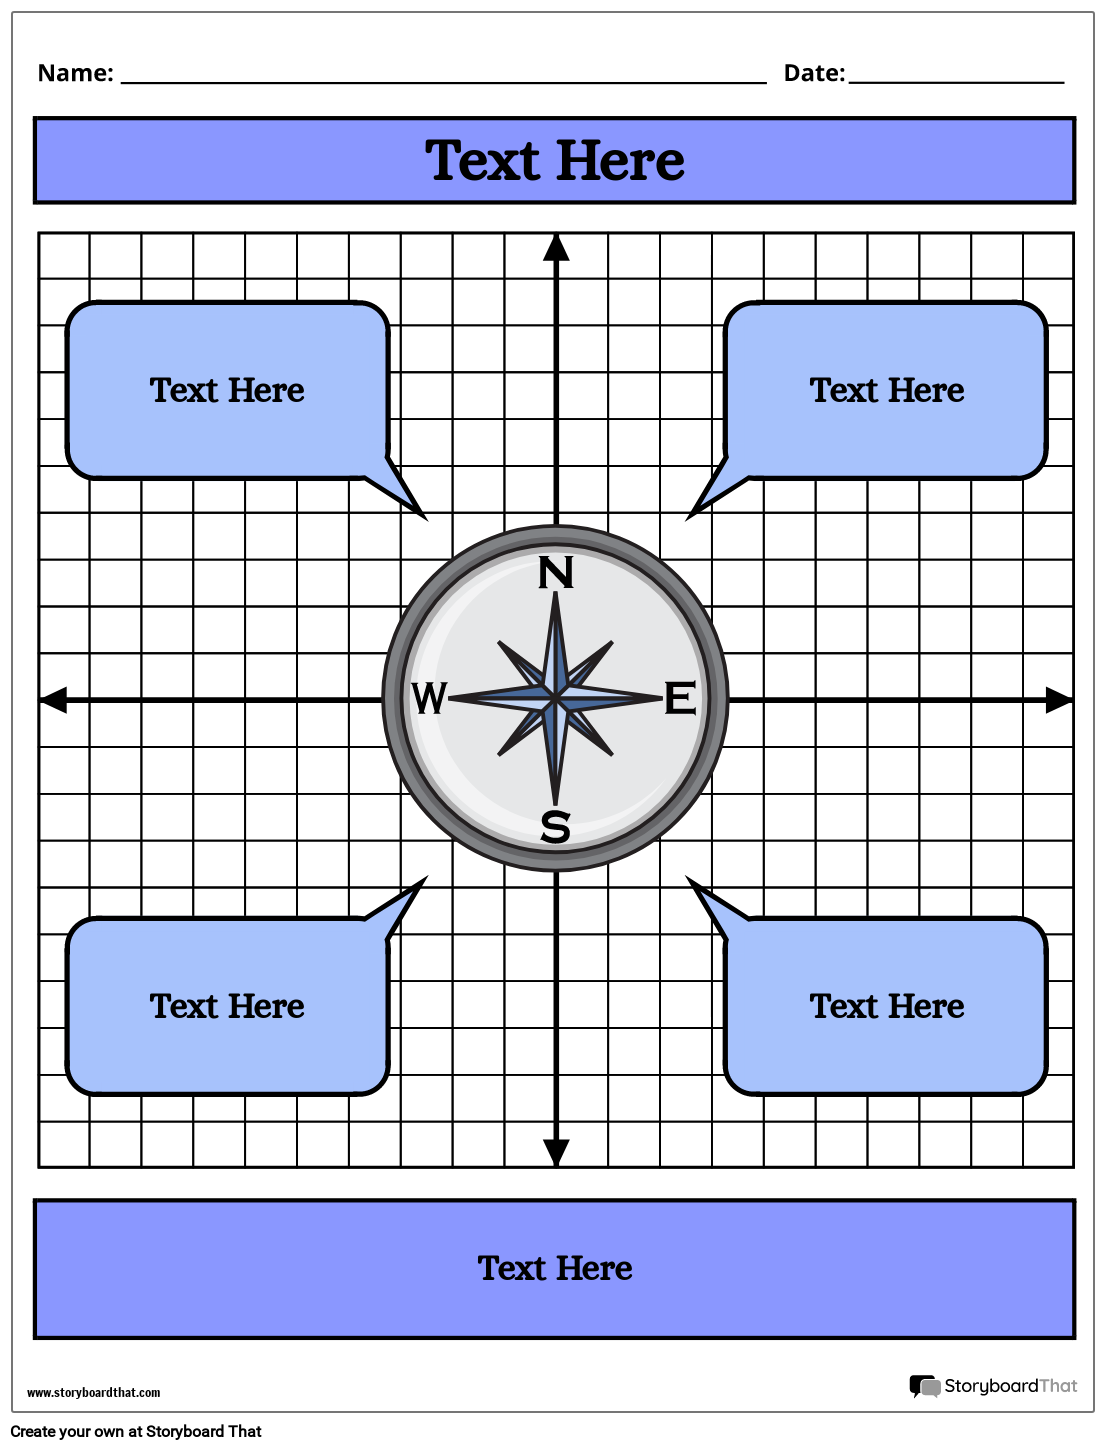 Measuring Angles & Compass Rose Flashcards